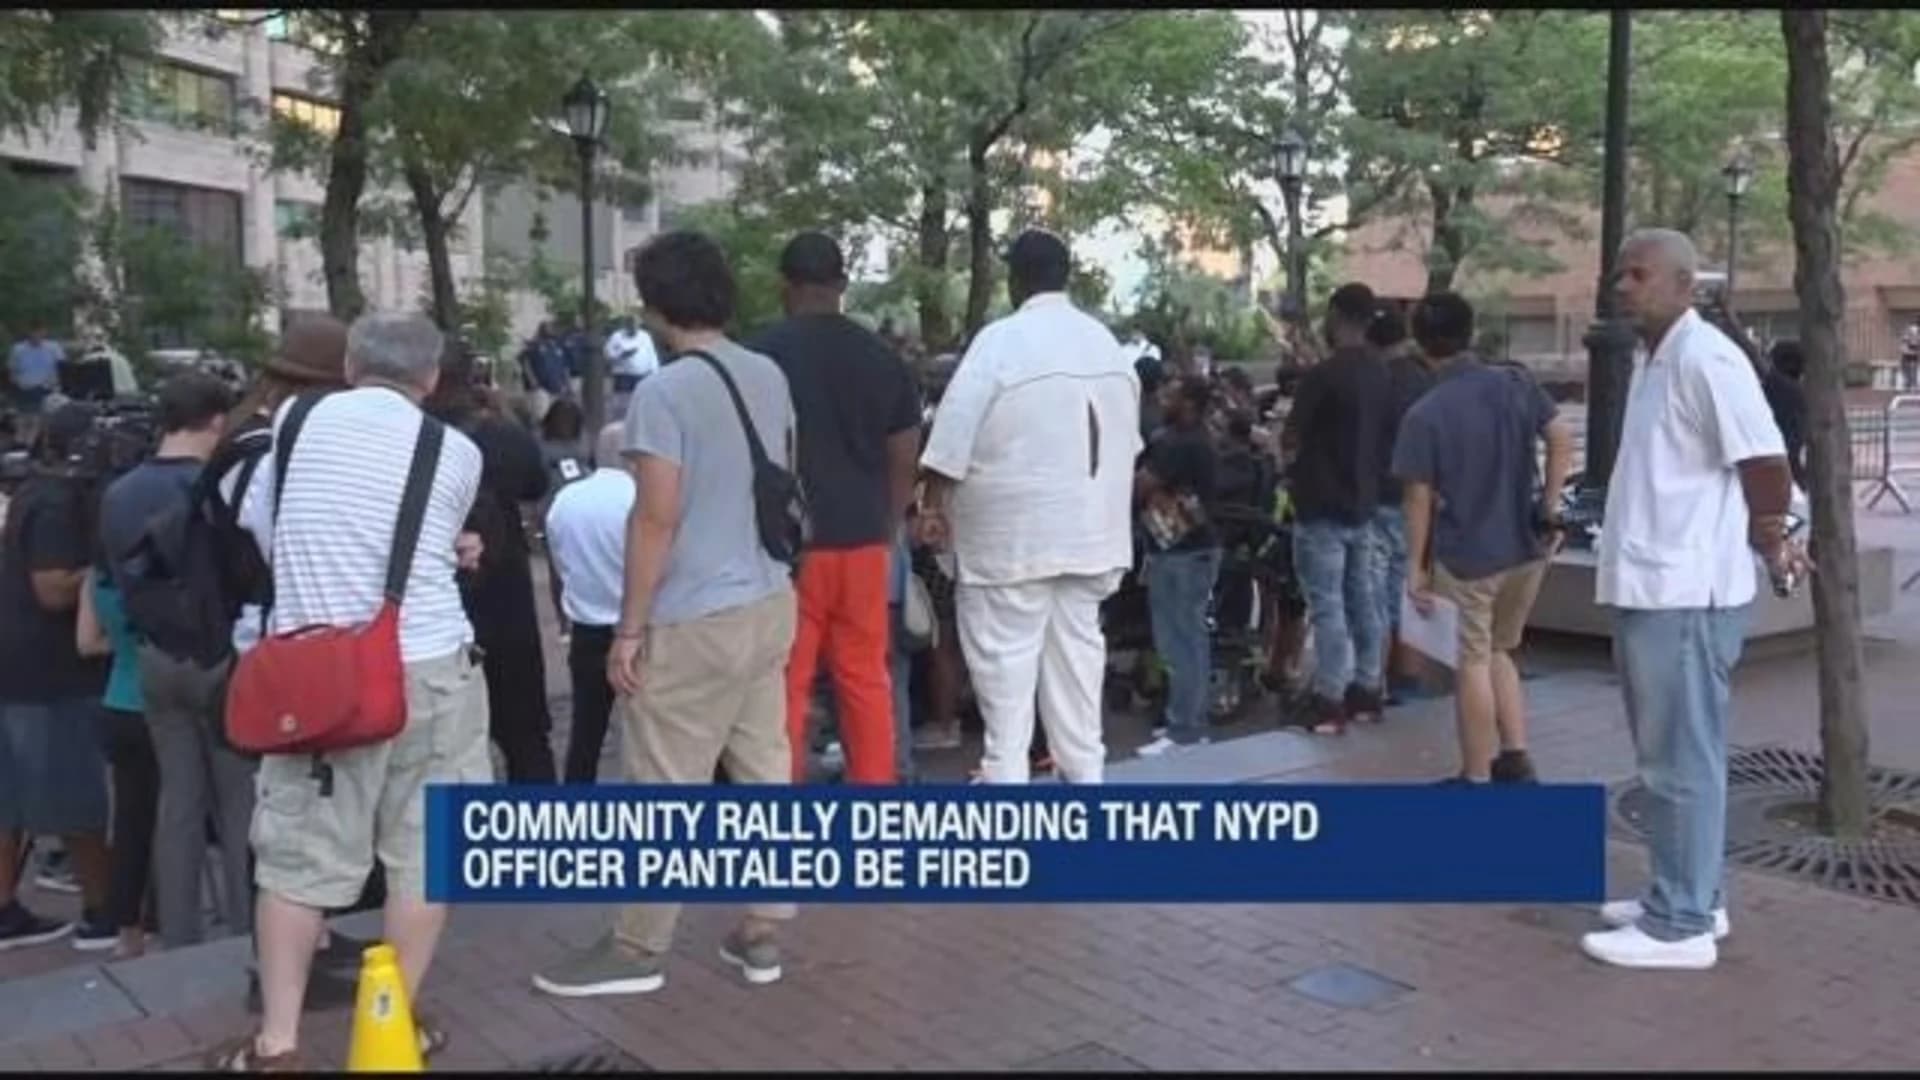 Rally at NYPD HQ demands officer in Eric Garner case be fired